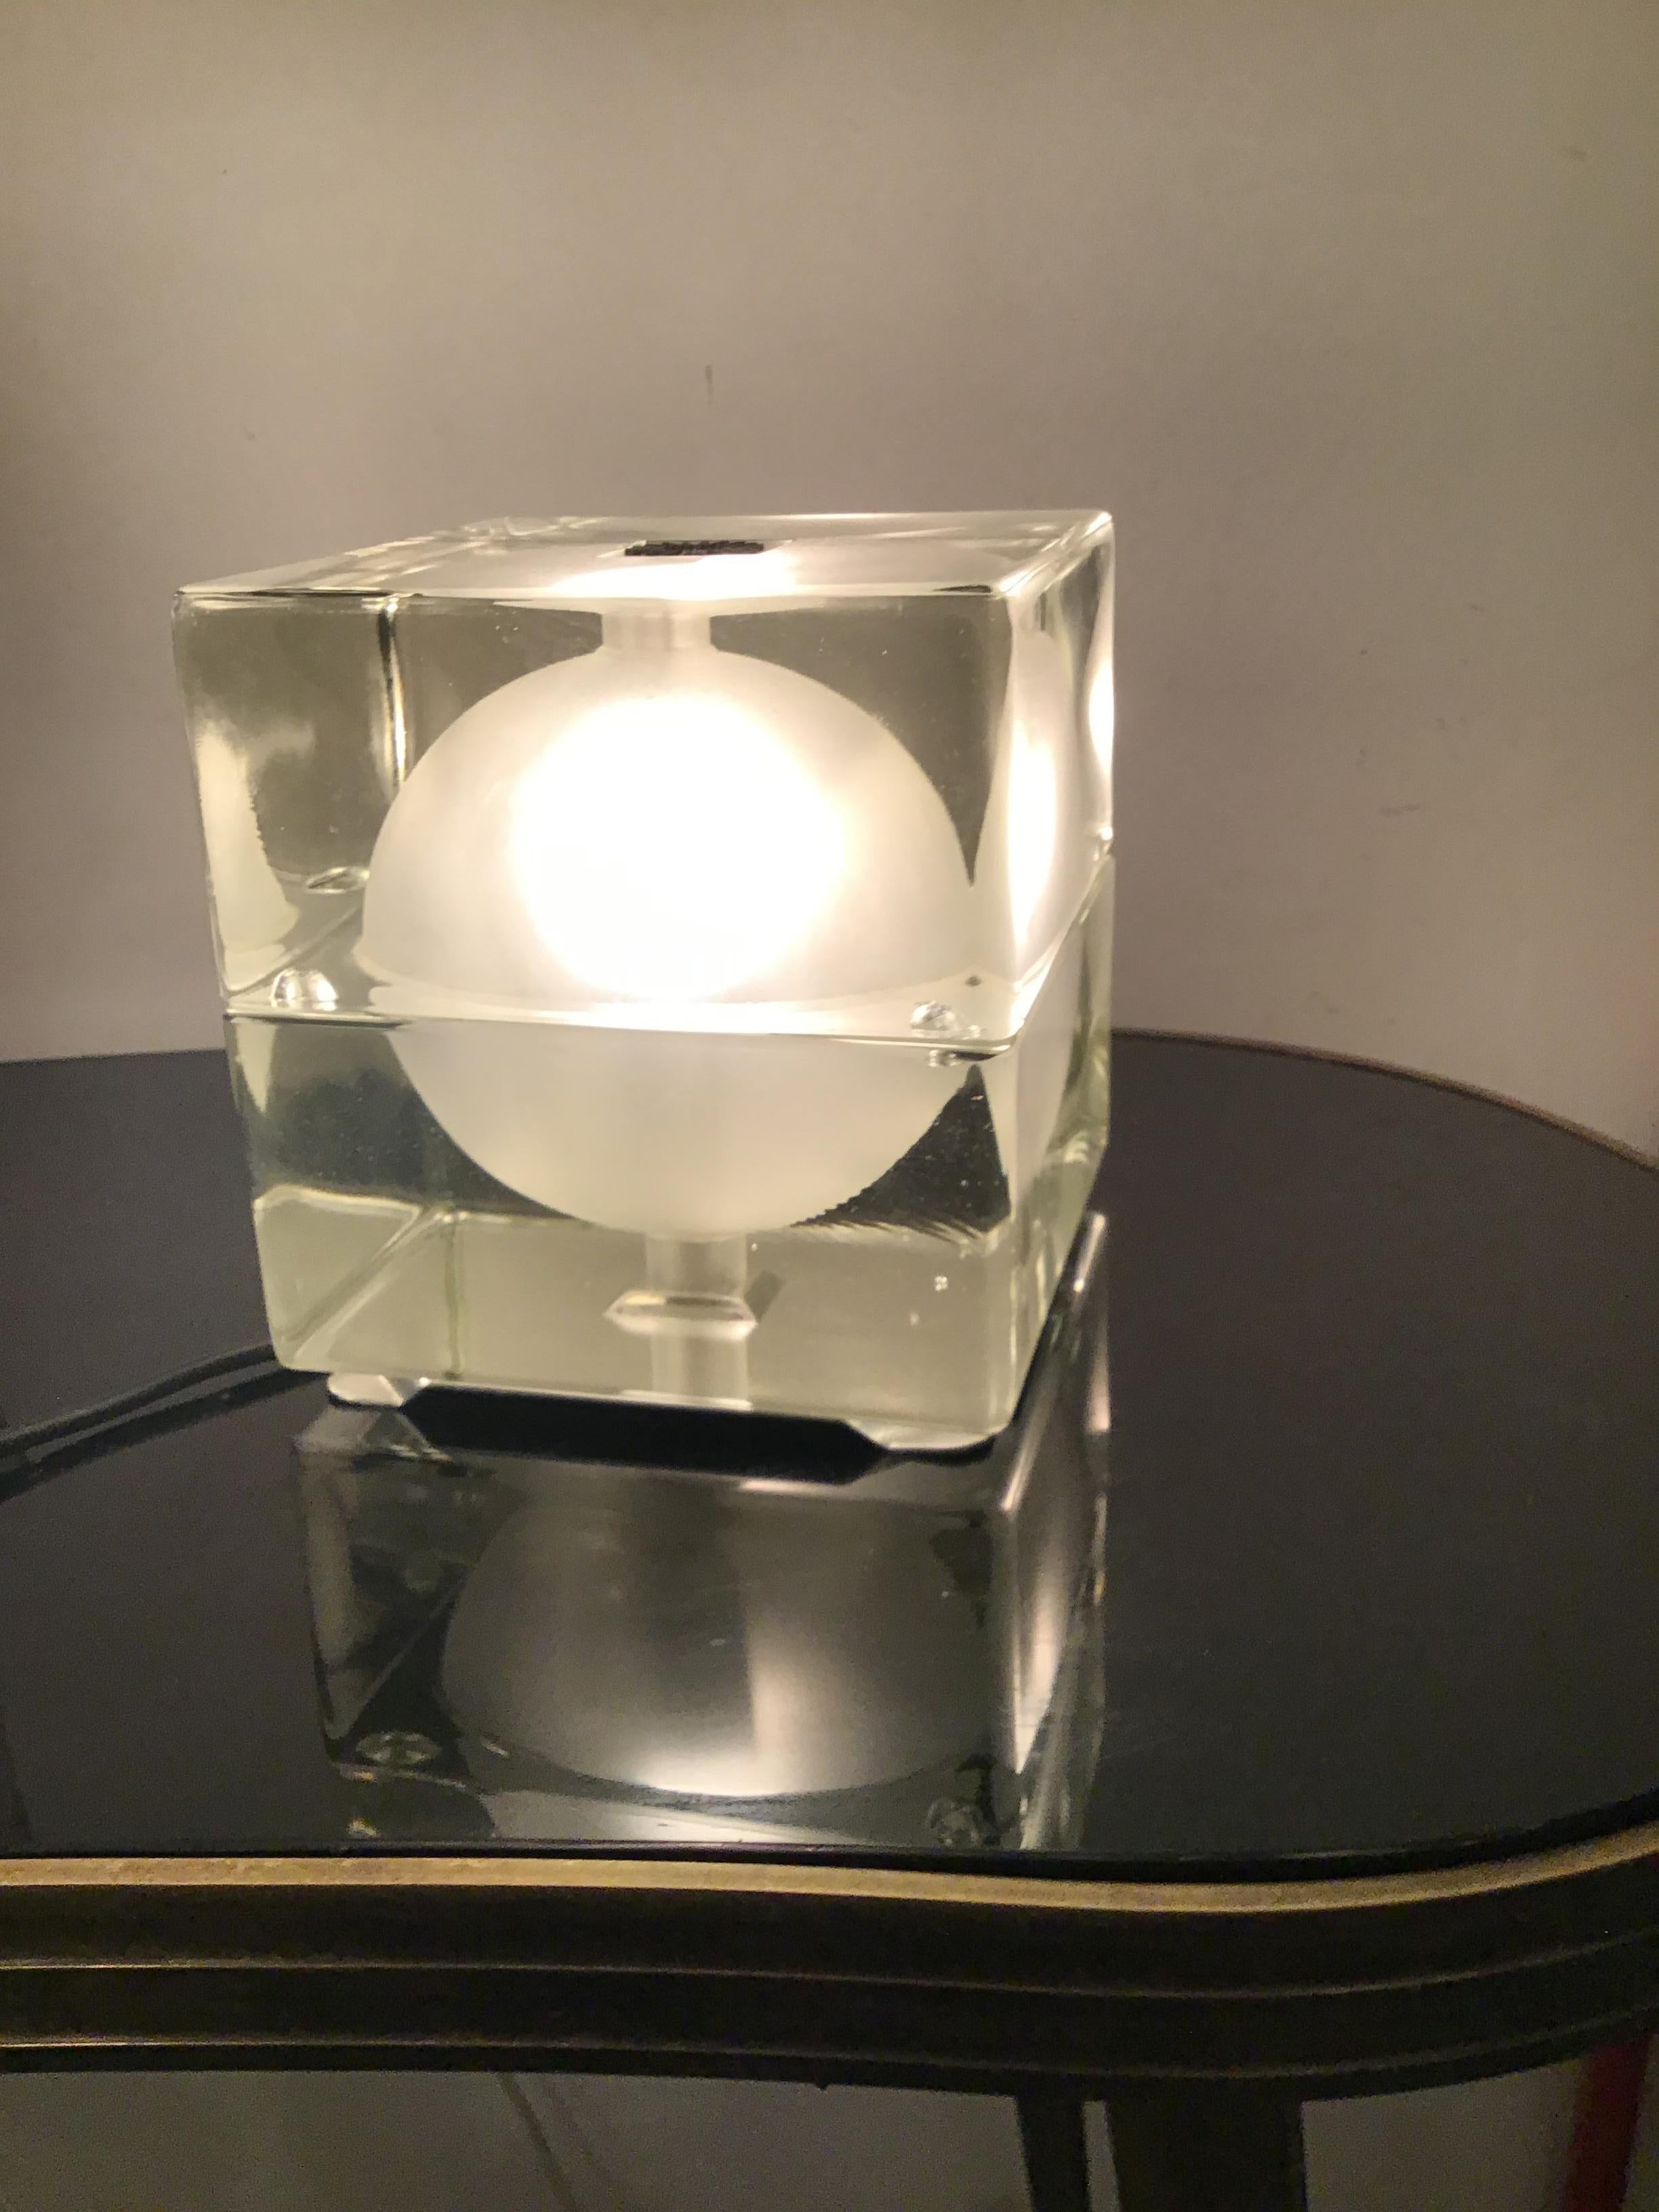 Alessandro Mendini “Cubosfera” Table Lamp Metal Crome Glass 1968 Italy For Sale 3